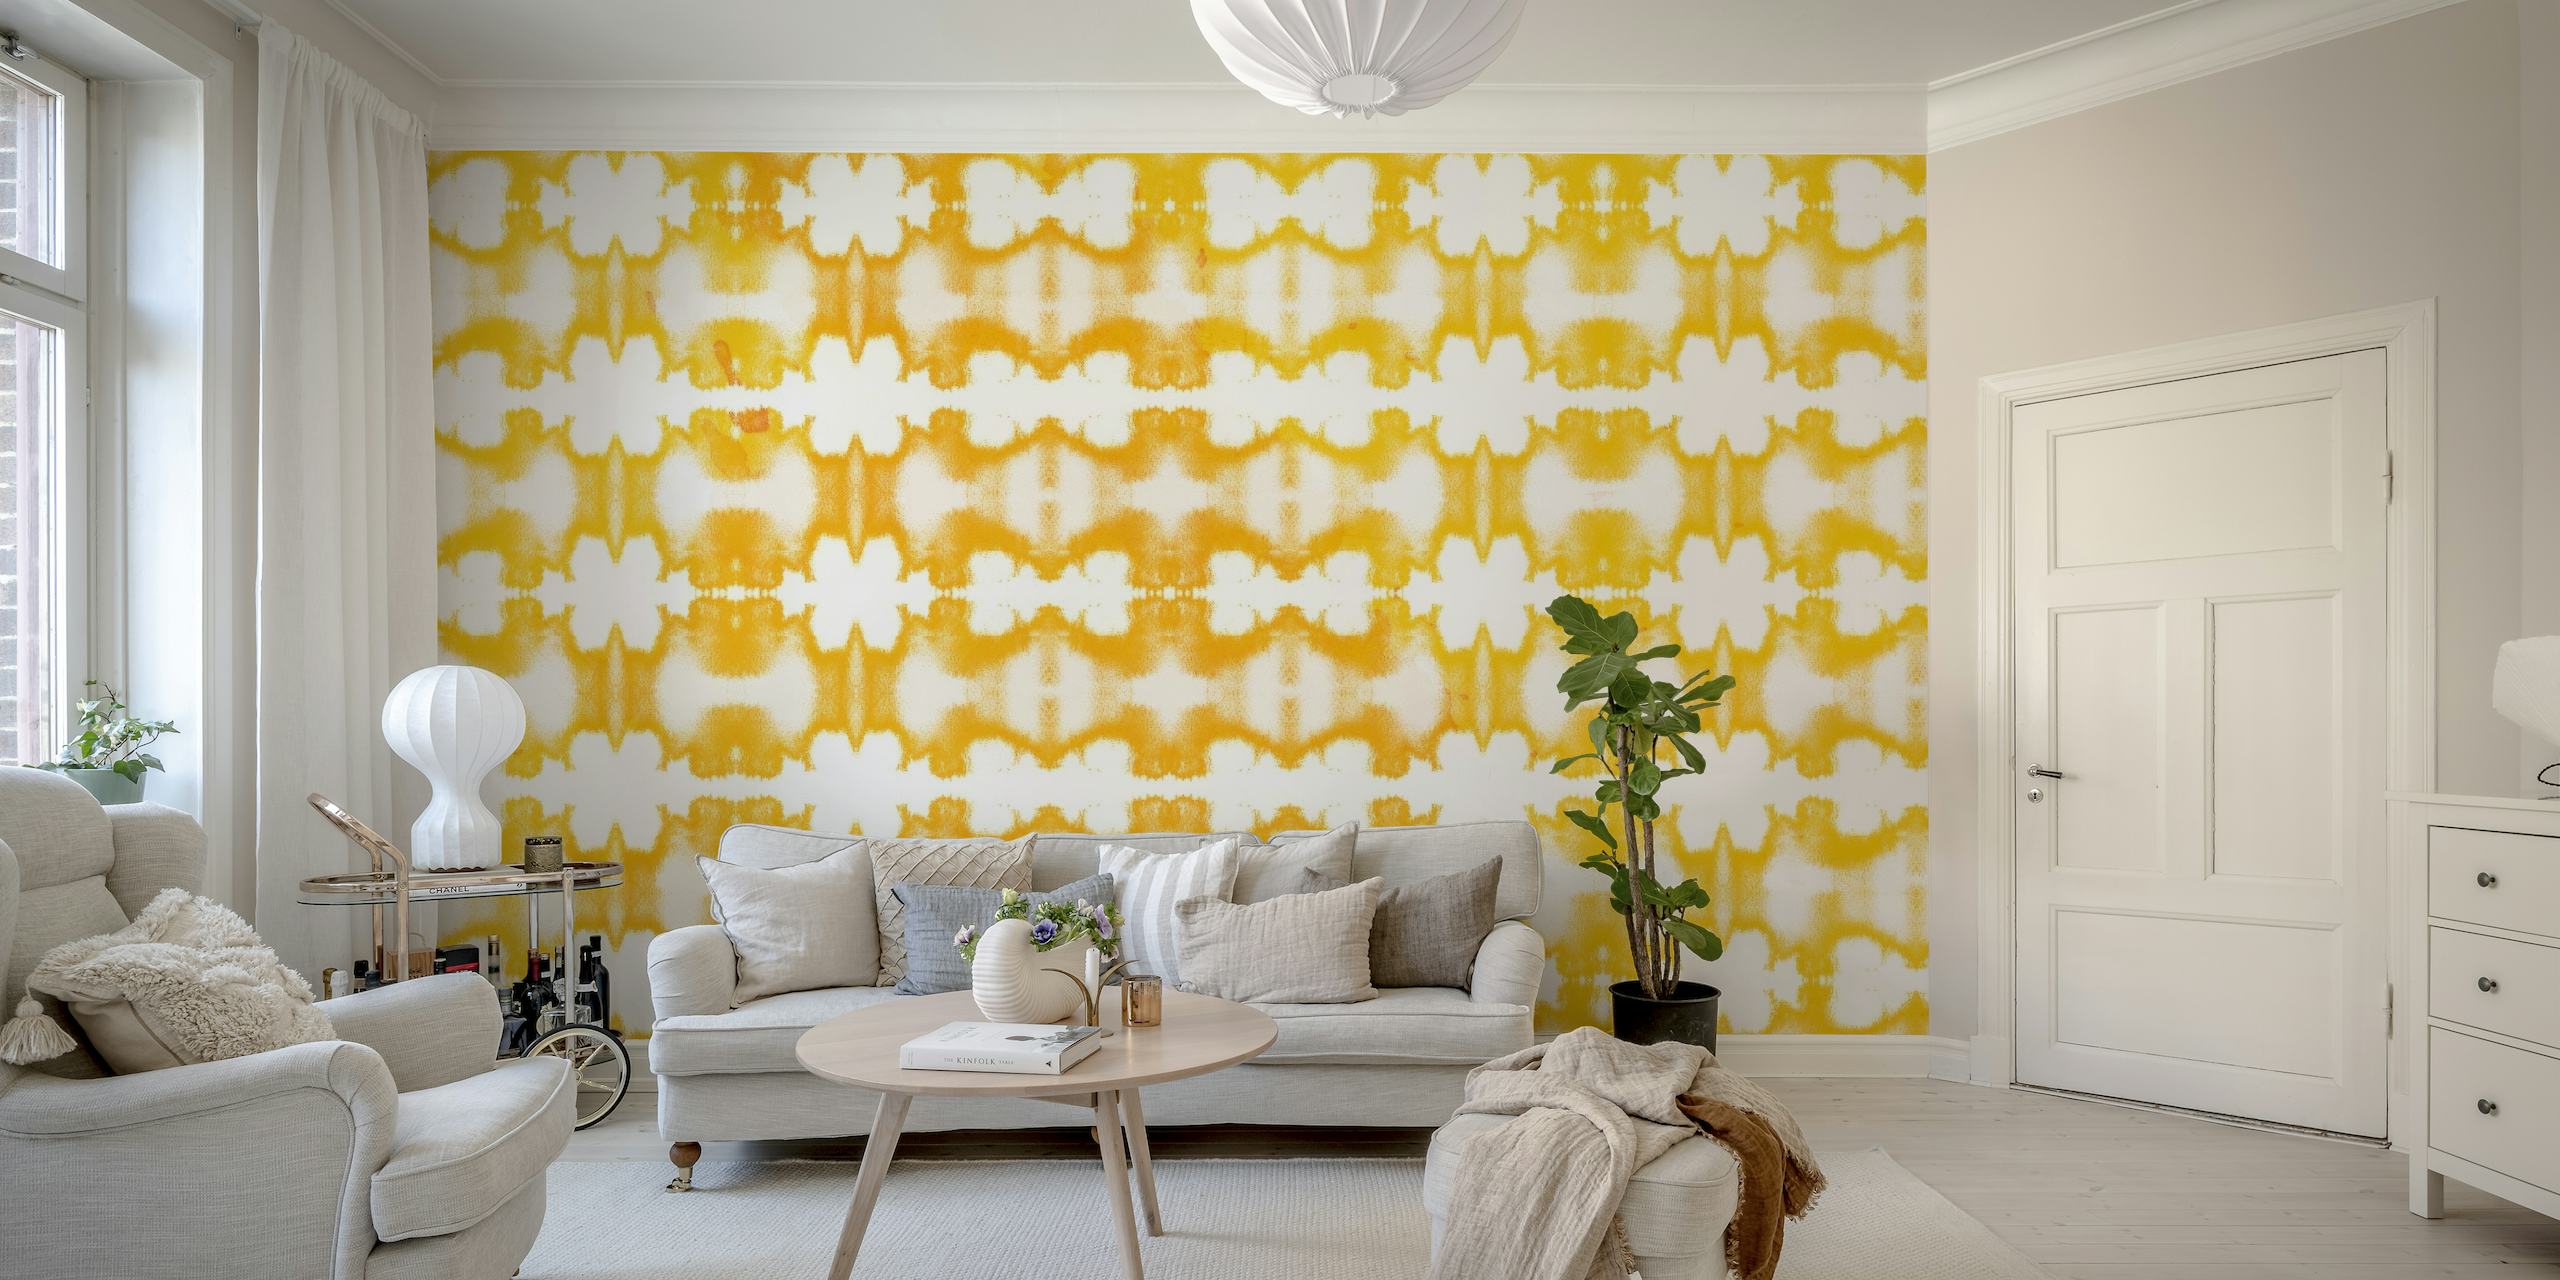 A luxurious gold and white patterned wall mural inspired by Asian culture.